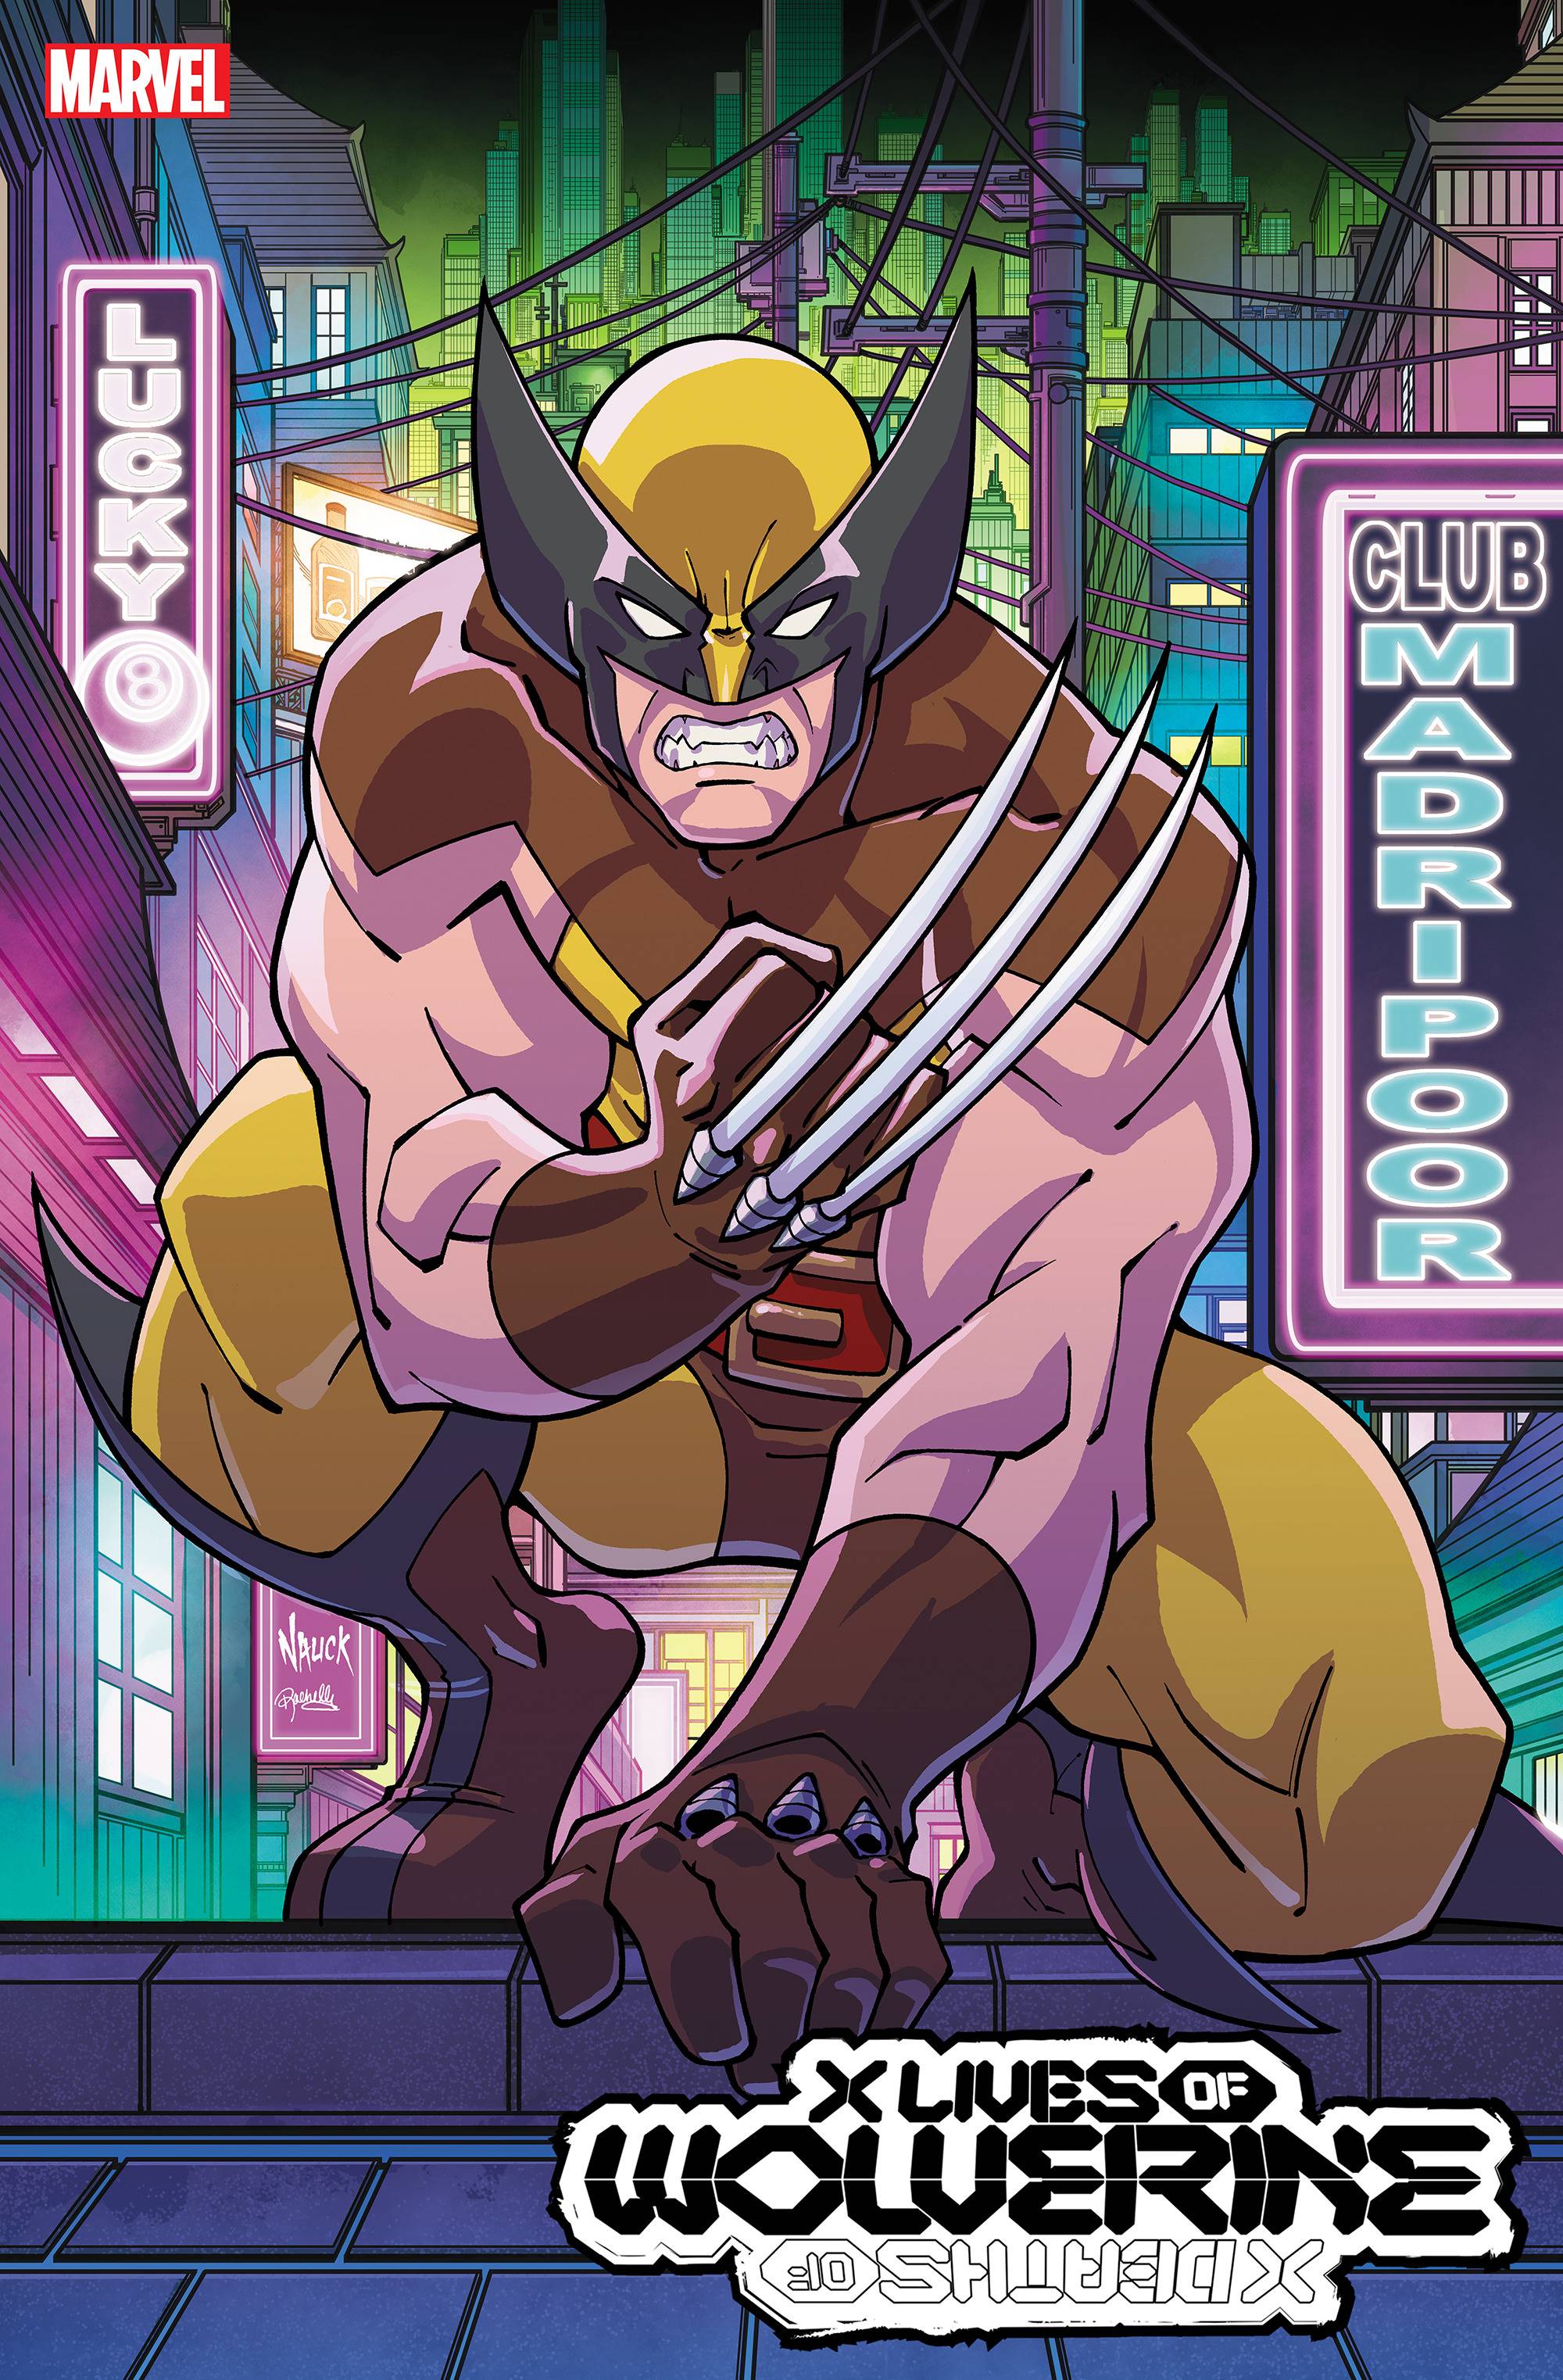 X LIVES OF WOLVERINE #1 NAUCK ANIMATION STYLE VAR